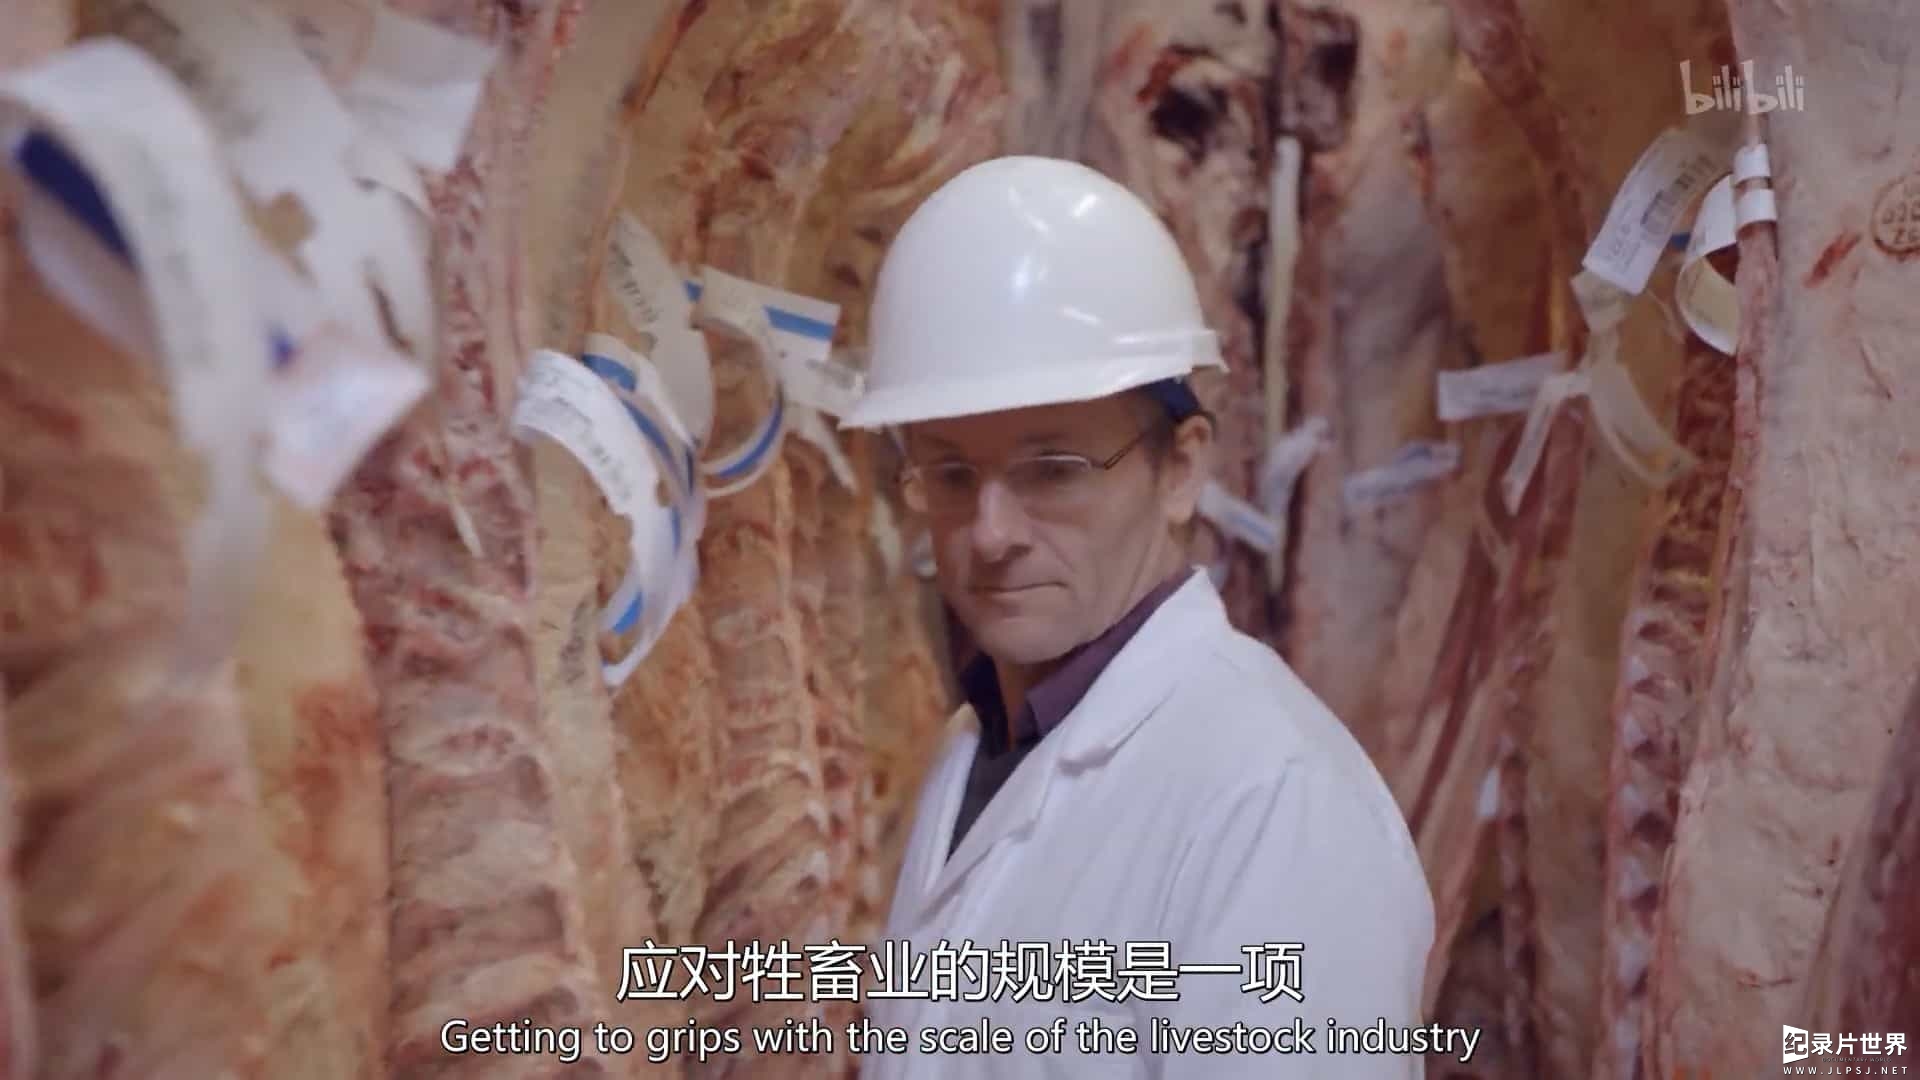 BBC纪录片《肉的真相/肉类真相 The Truth About Meat 2018》全1集